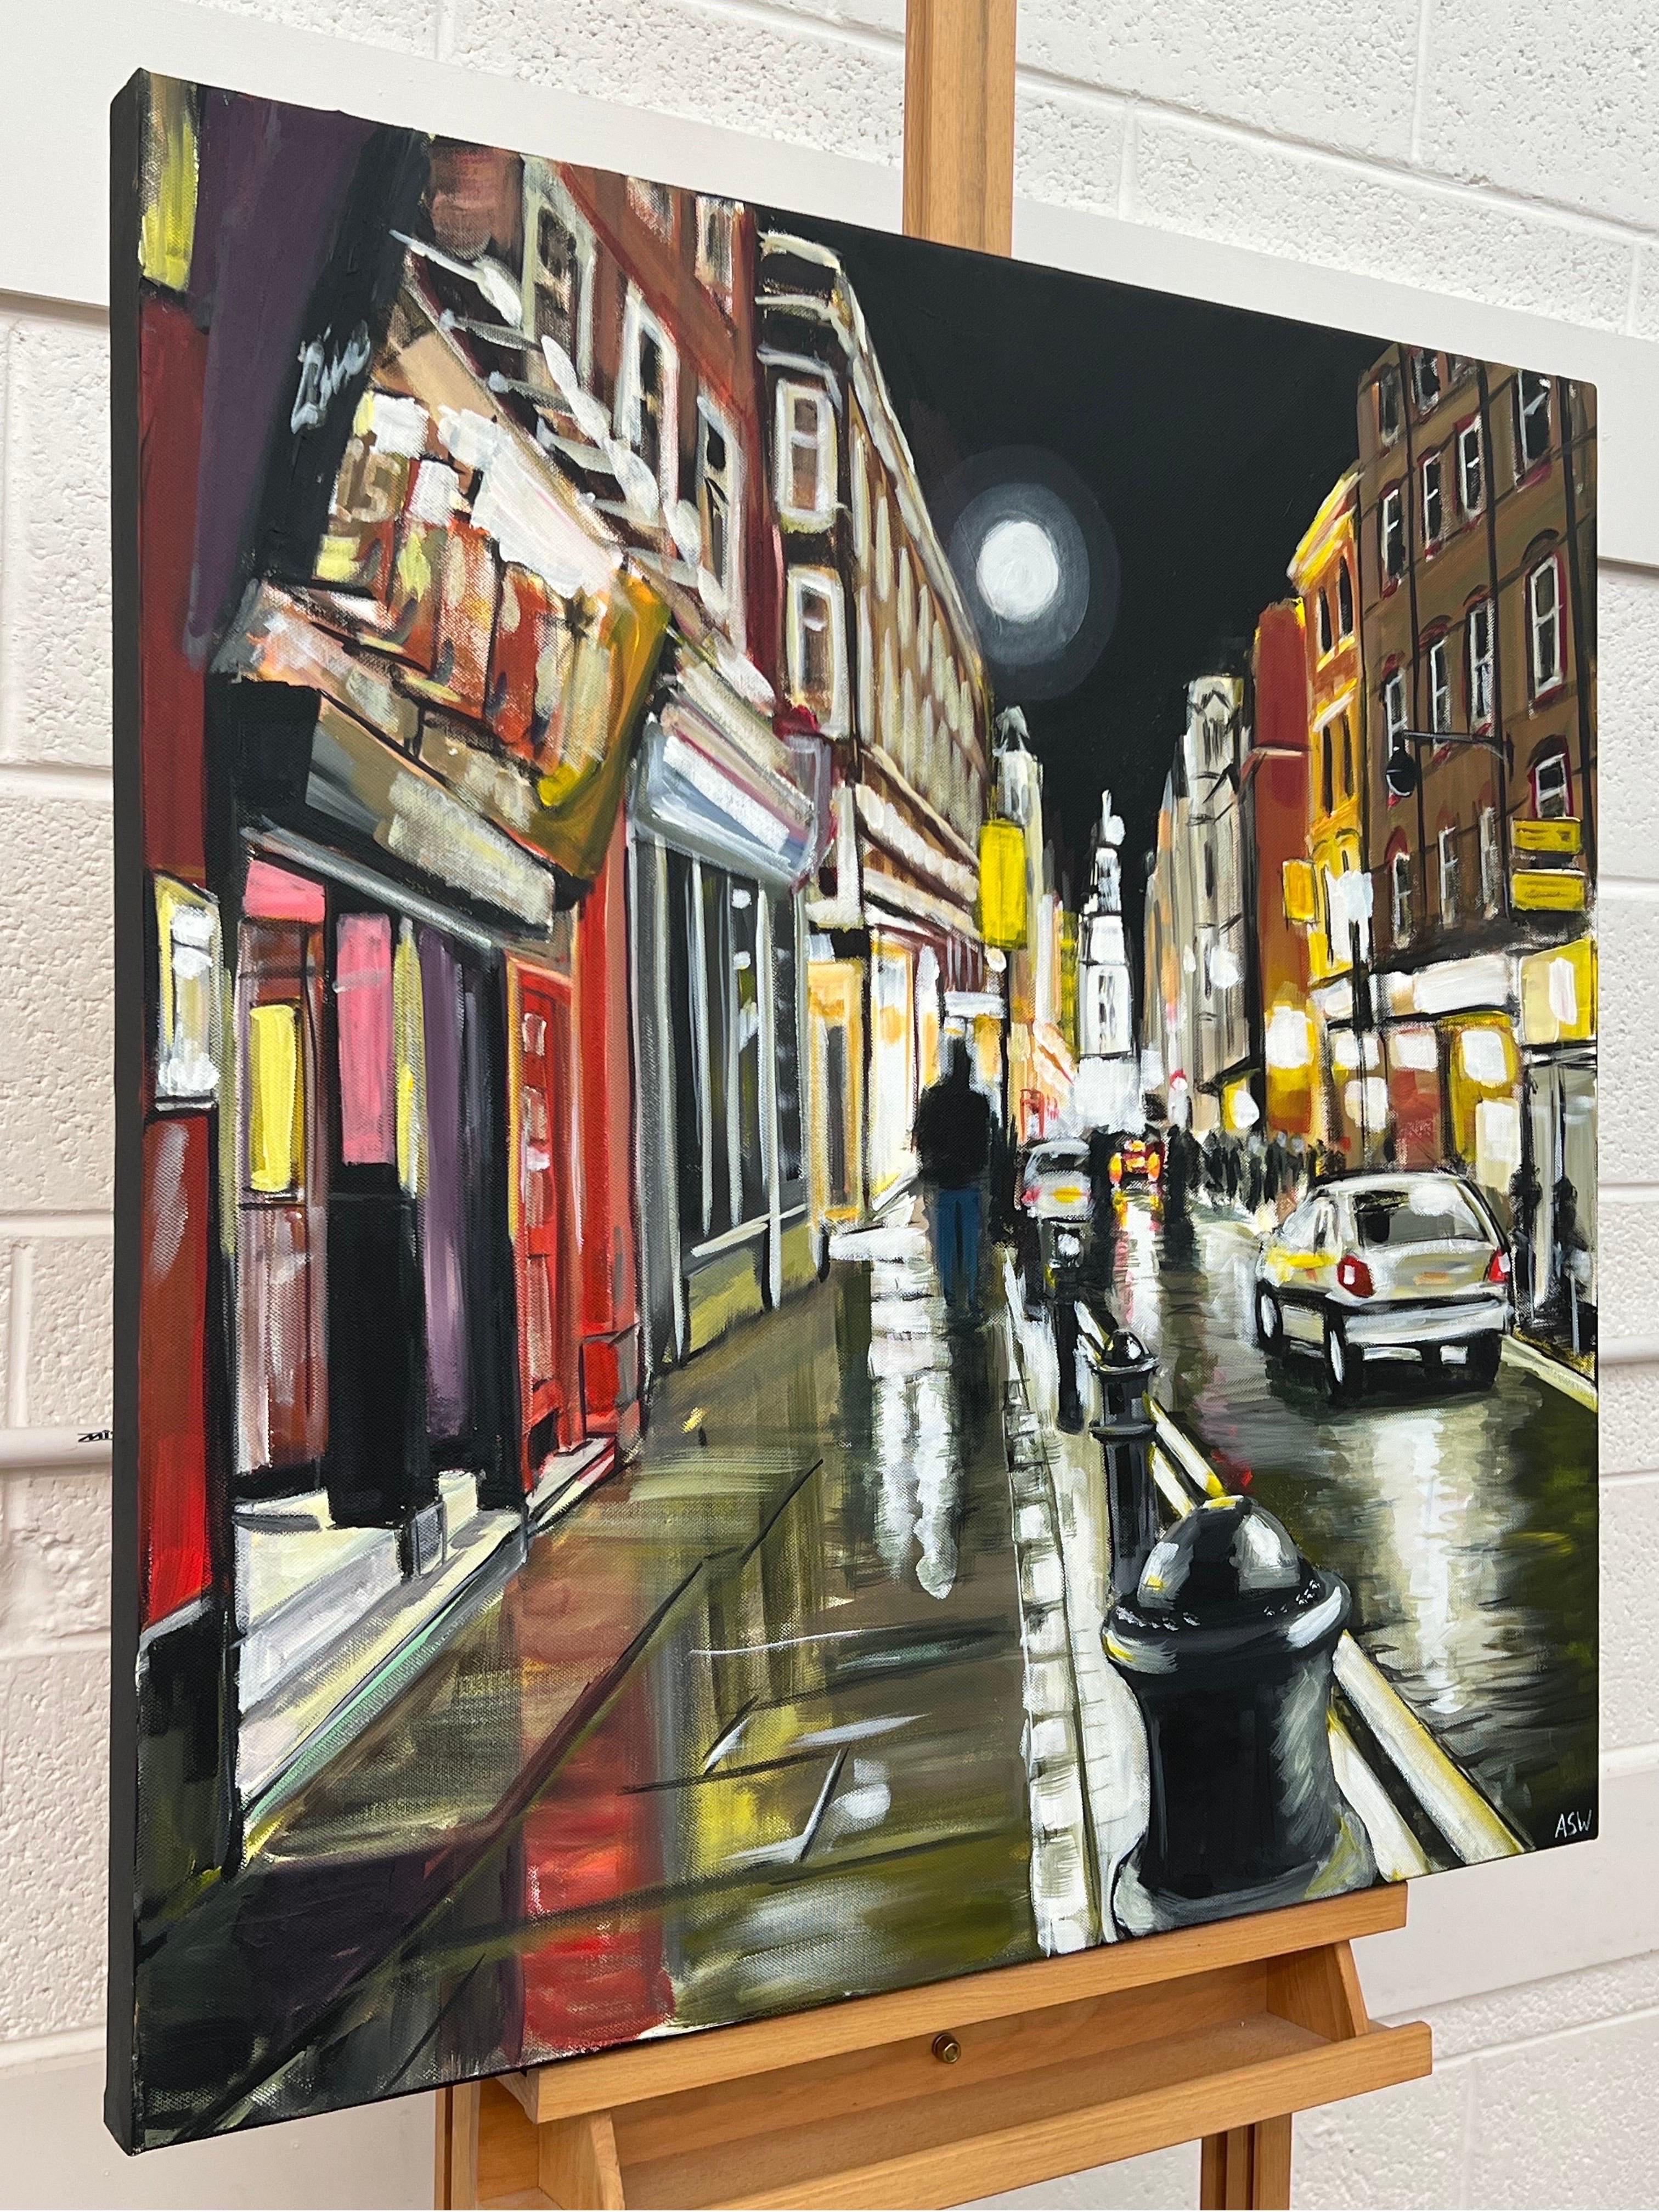 Modern Impressionist Painting of Soho London at Night by Urban Landscape Artist, Angela Wakefield

Art measures 30 x 30 inches 

Angela Wakefield has produced numerous paintings of London over the last decade. The City of London is full of